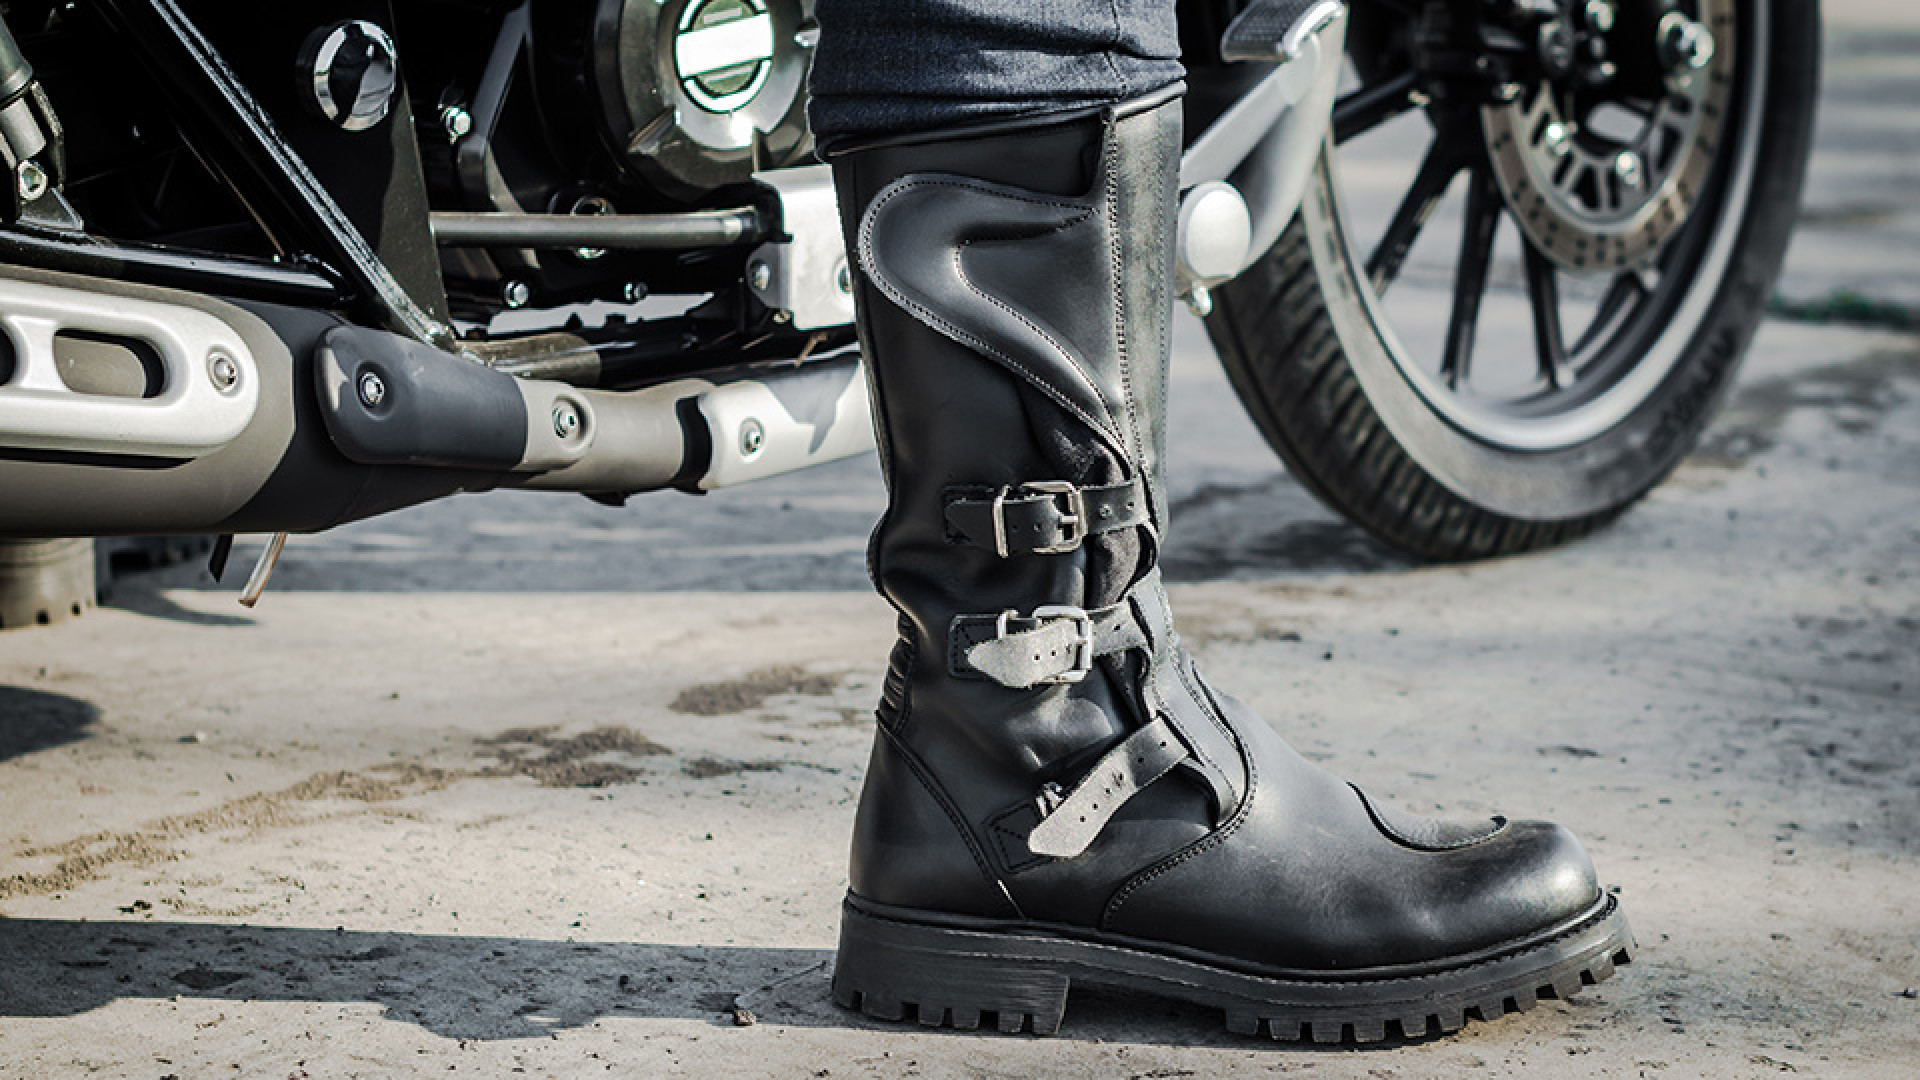 https://www.raceleathers.co.uk/image/cache/catalog/Blog%20Images/Will%20Motorcycle%20Boots%20Stretch-1920x1080.jpg